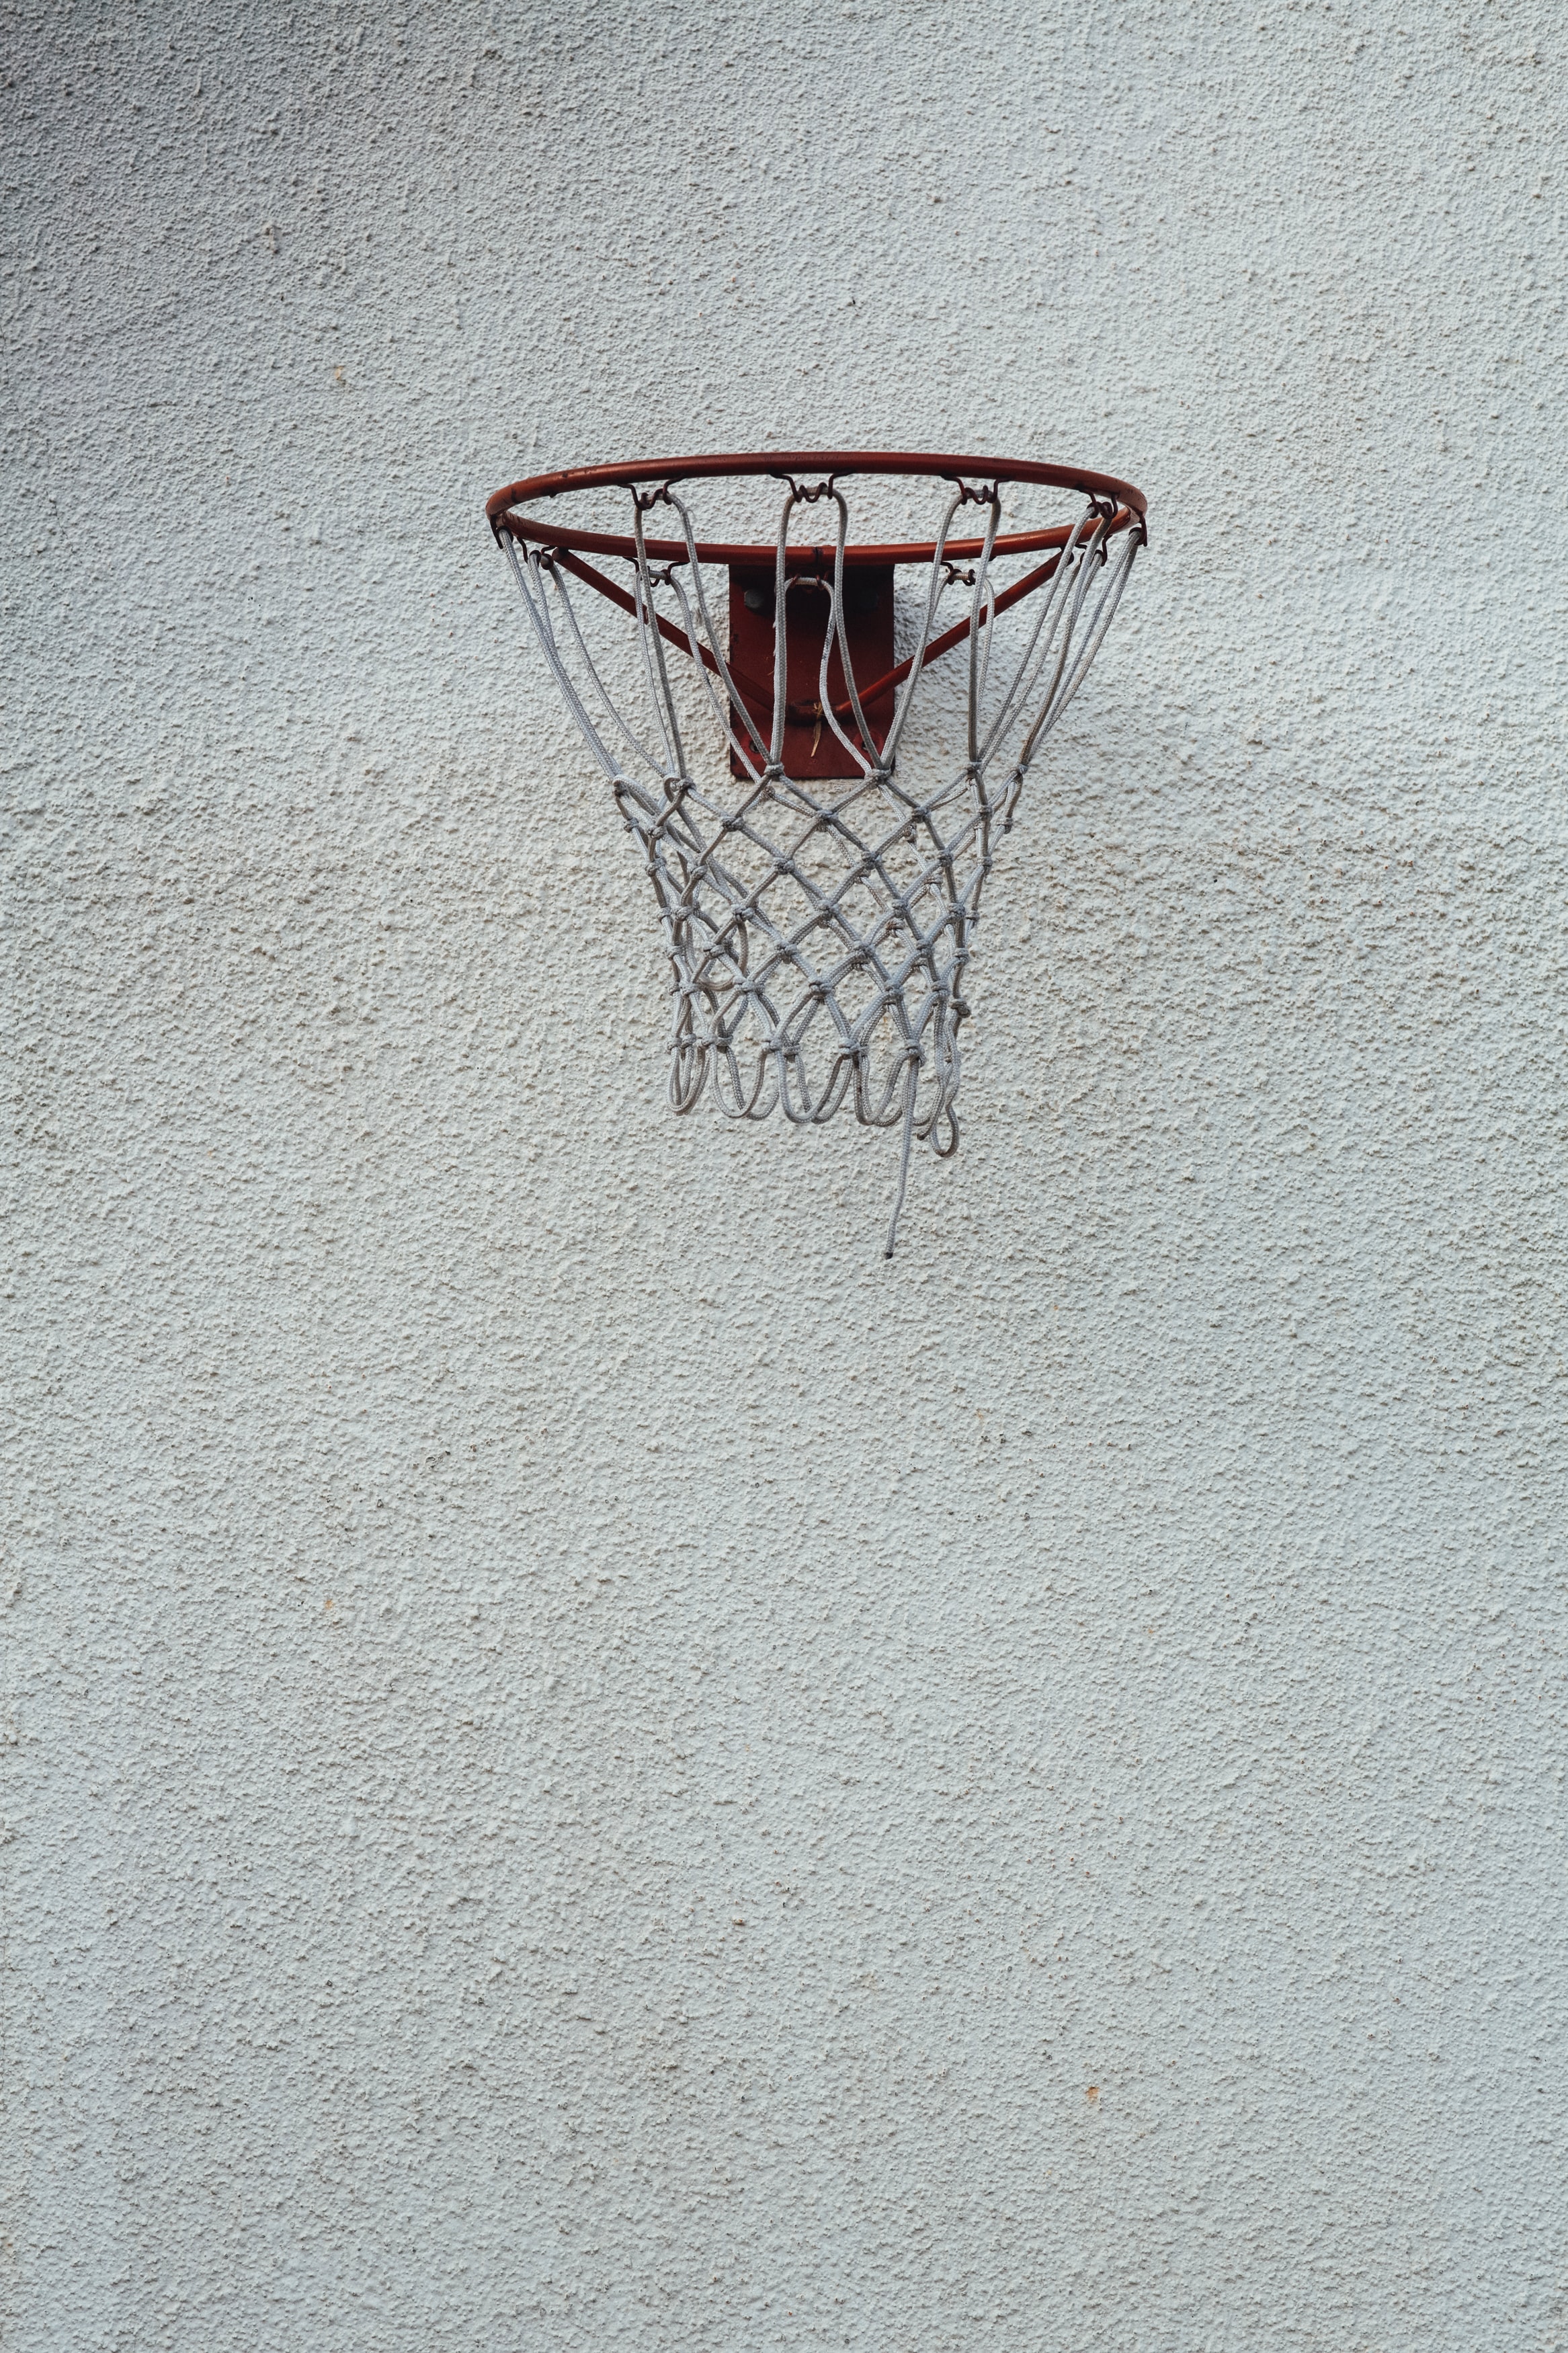 basketball, basketball hoop, basketball ring, miscellanea, miscellaneous, grid, wall Aesthetic wallpaper